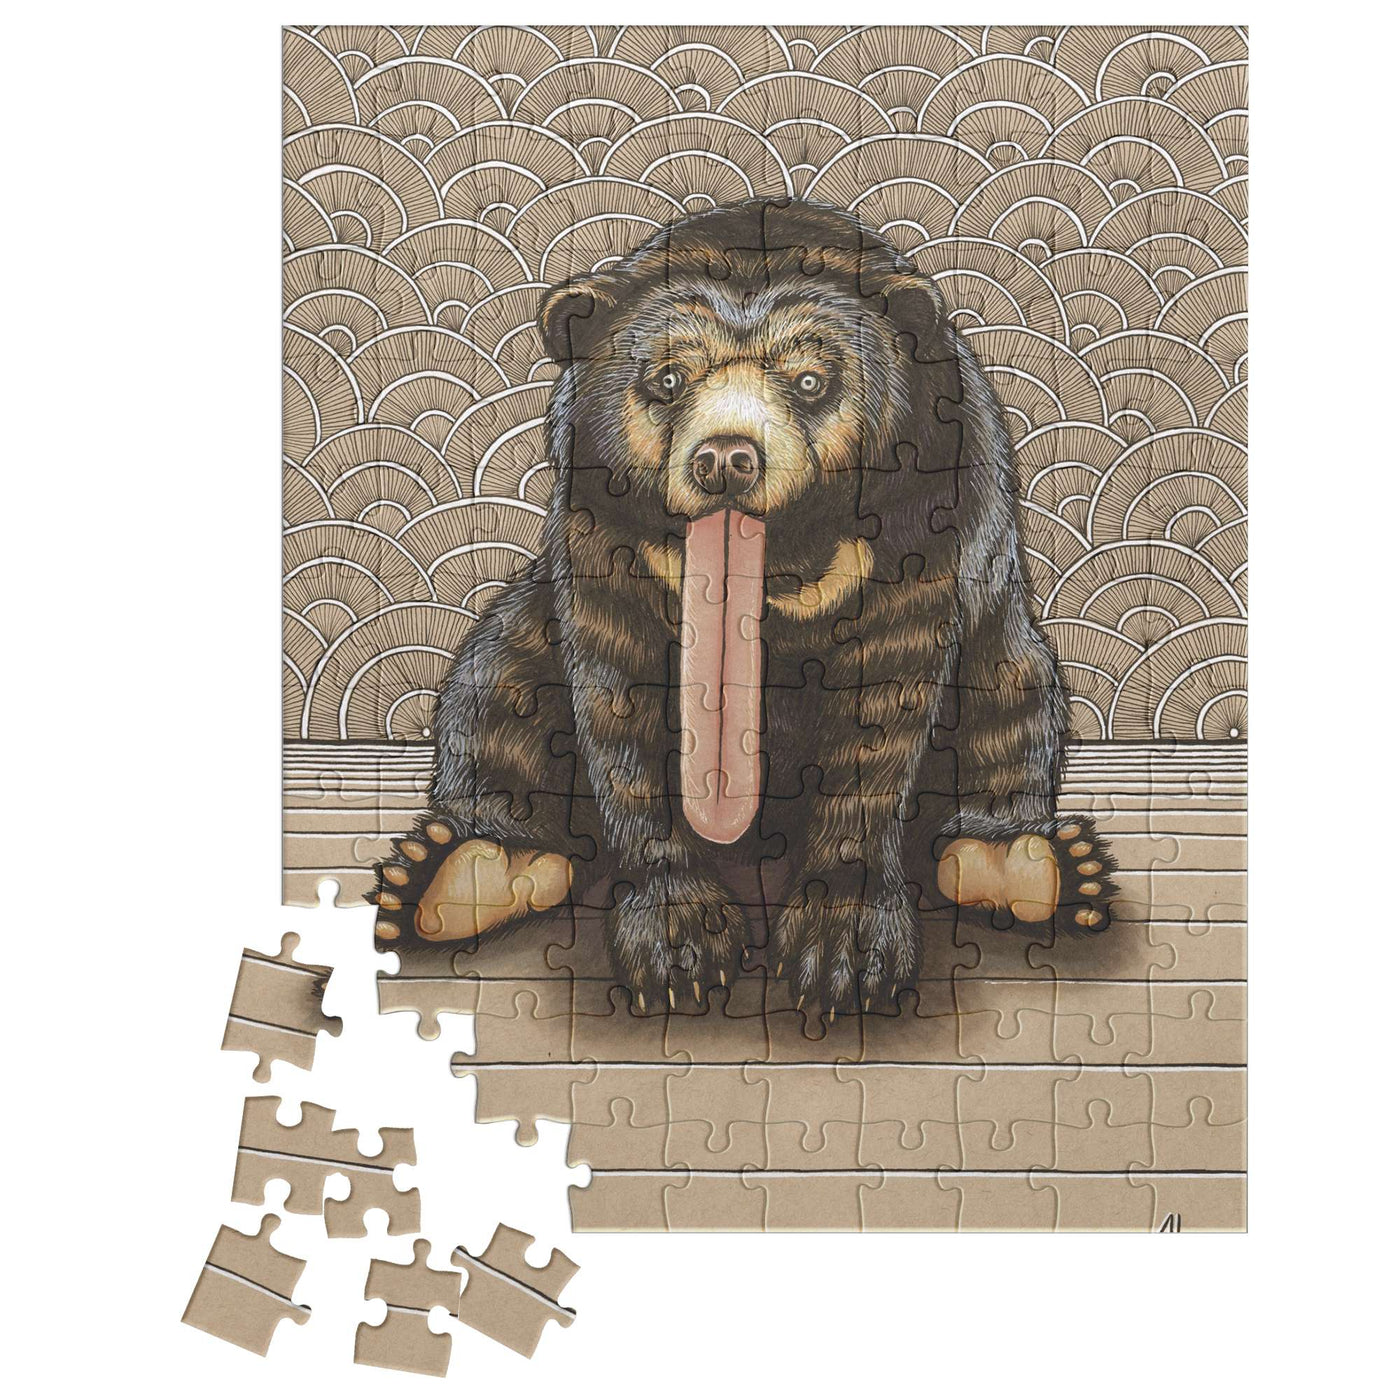 Sun Bear Puzzle depicting a bear with pieces missing at the bottom left, set against a patterned background.